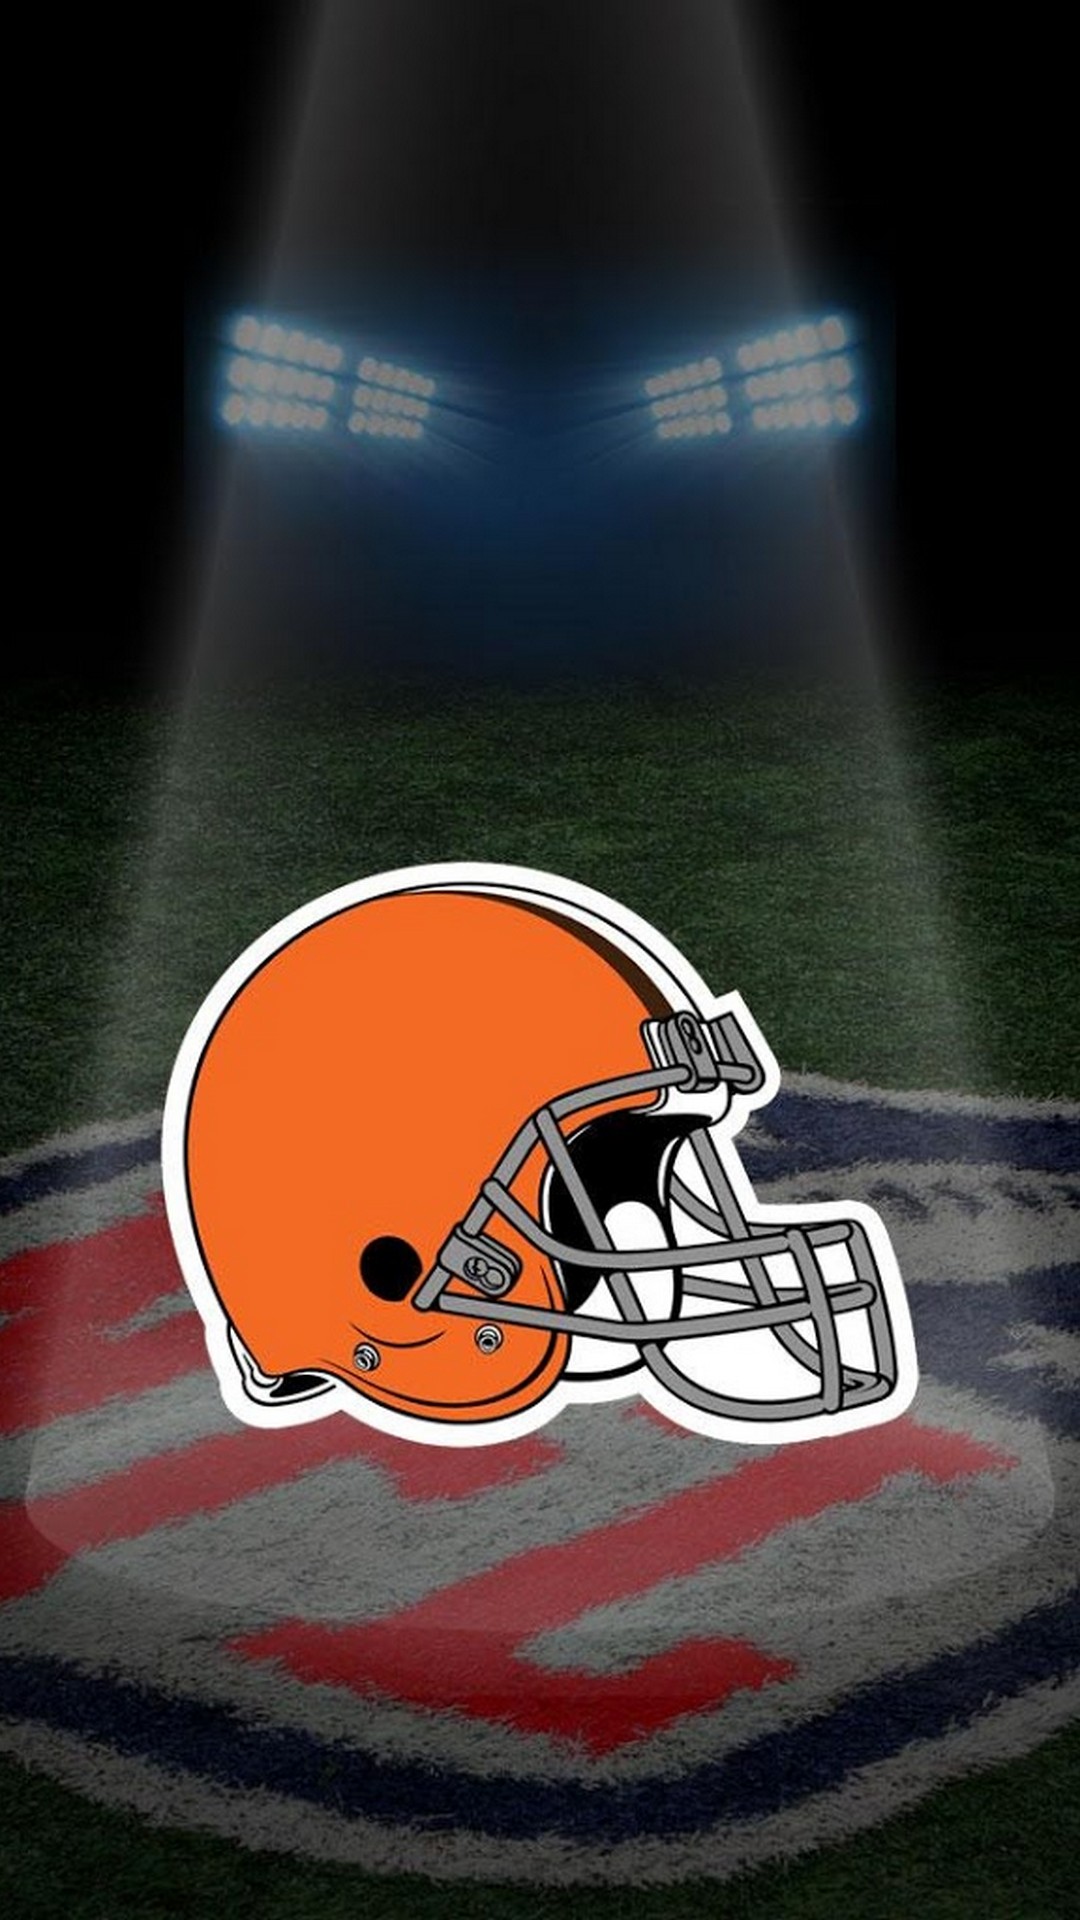 Cleveland Browns iPhone Wallpaper with high-resolution 1080x1920 pixel. Download and set as wallpaper for Apple iPhone X, XS Max, XR, 8, 7, 6, SE, iPad, Android